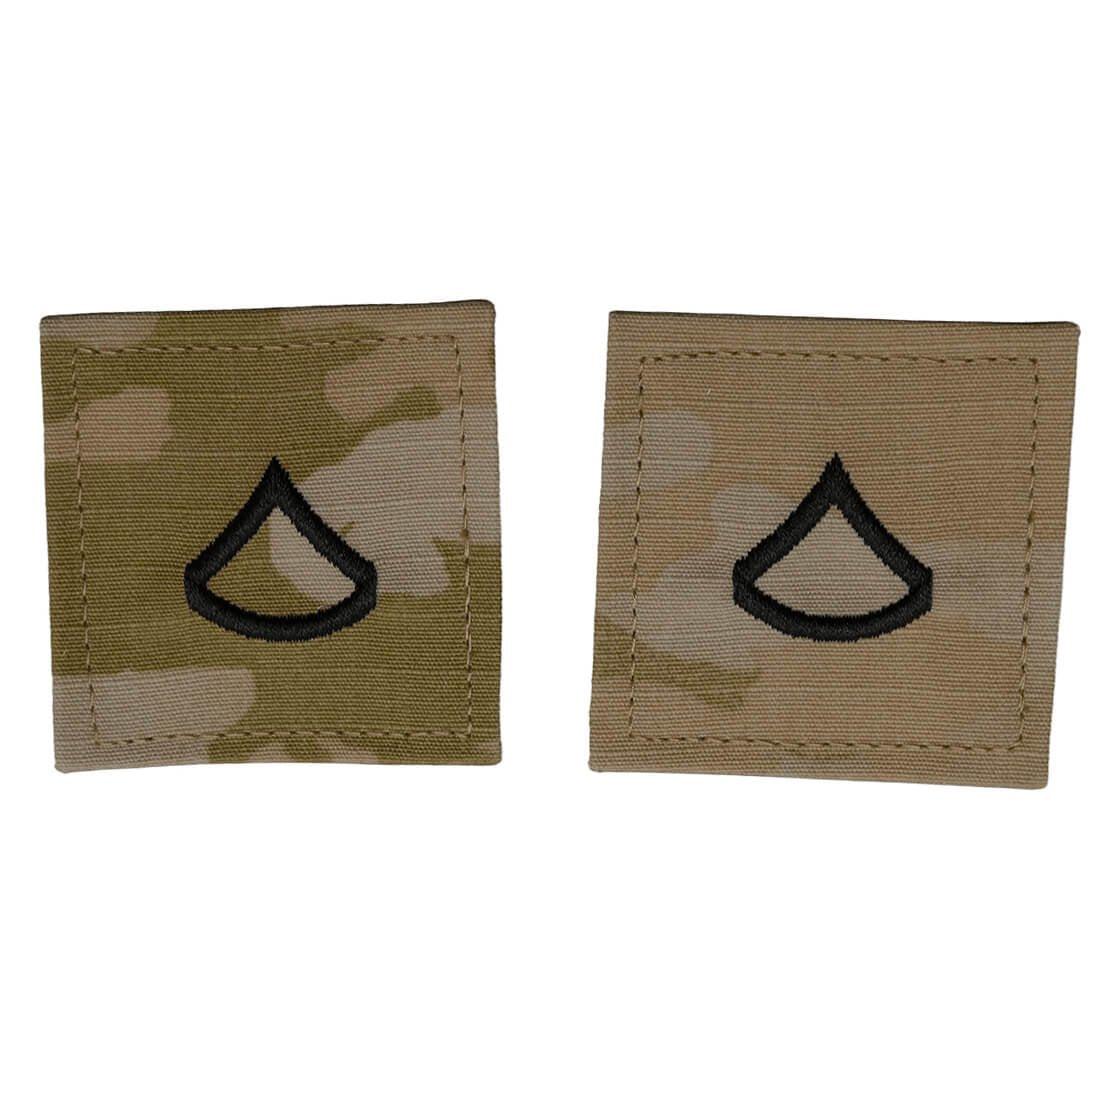 PFC Private First Class Army Rank OCP Patch With Hook Fastener - Pair